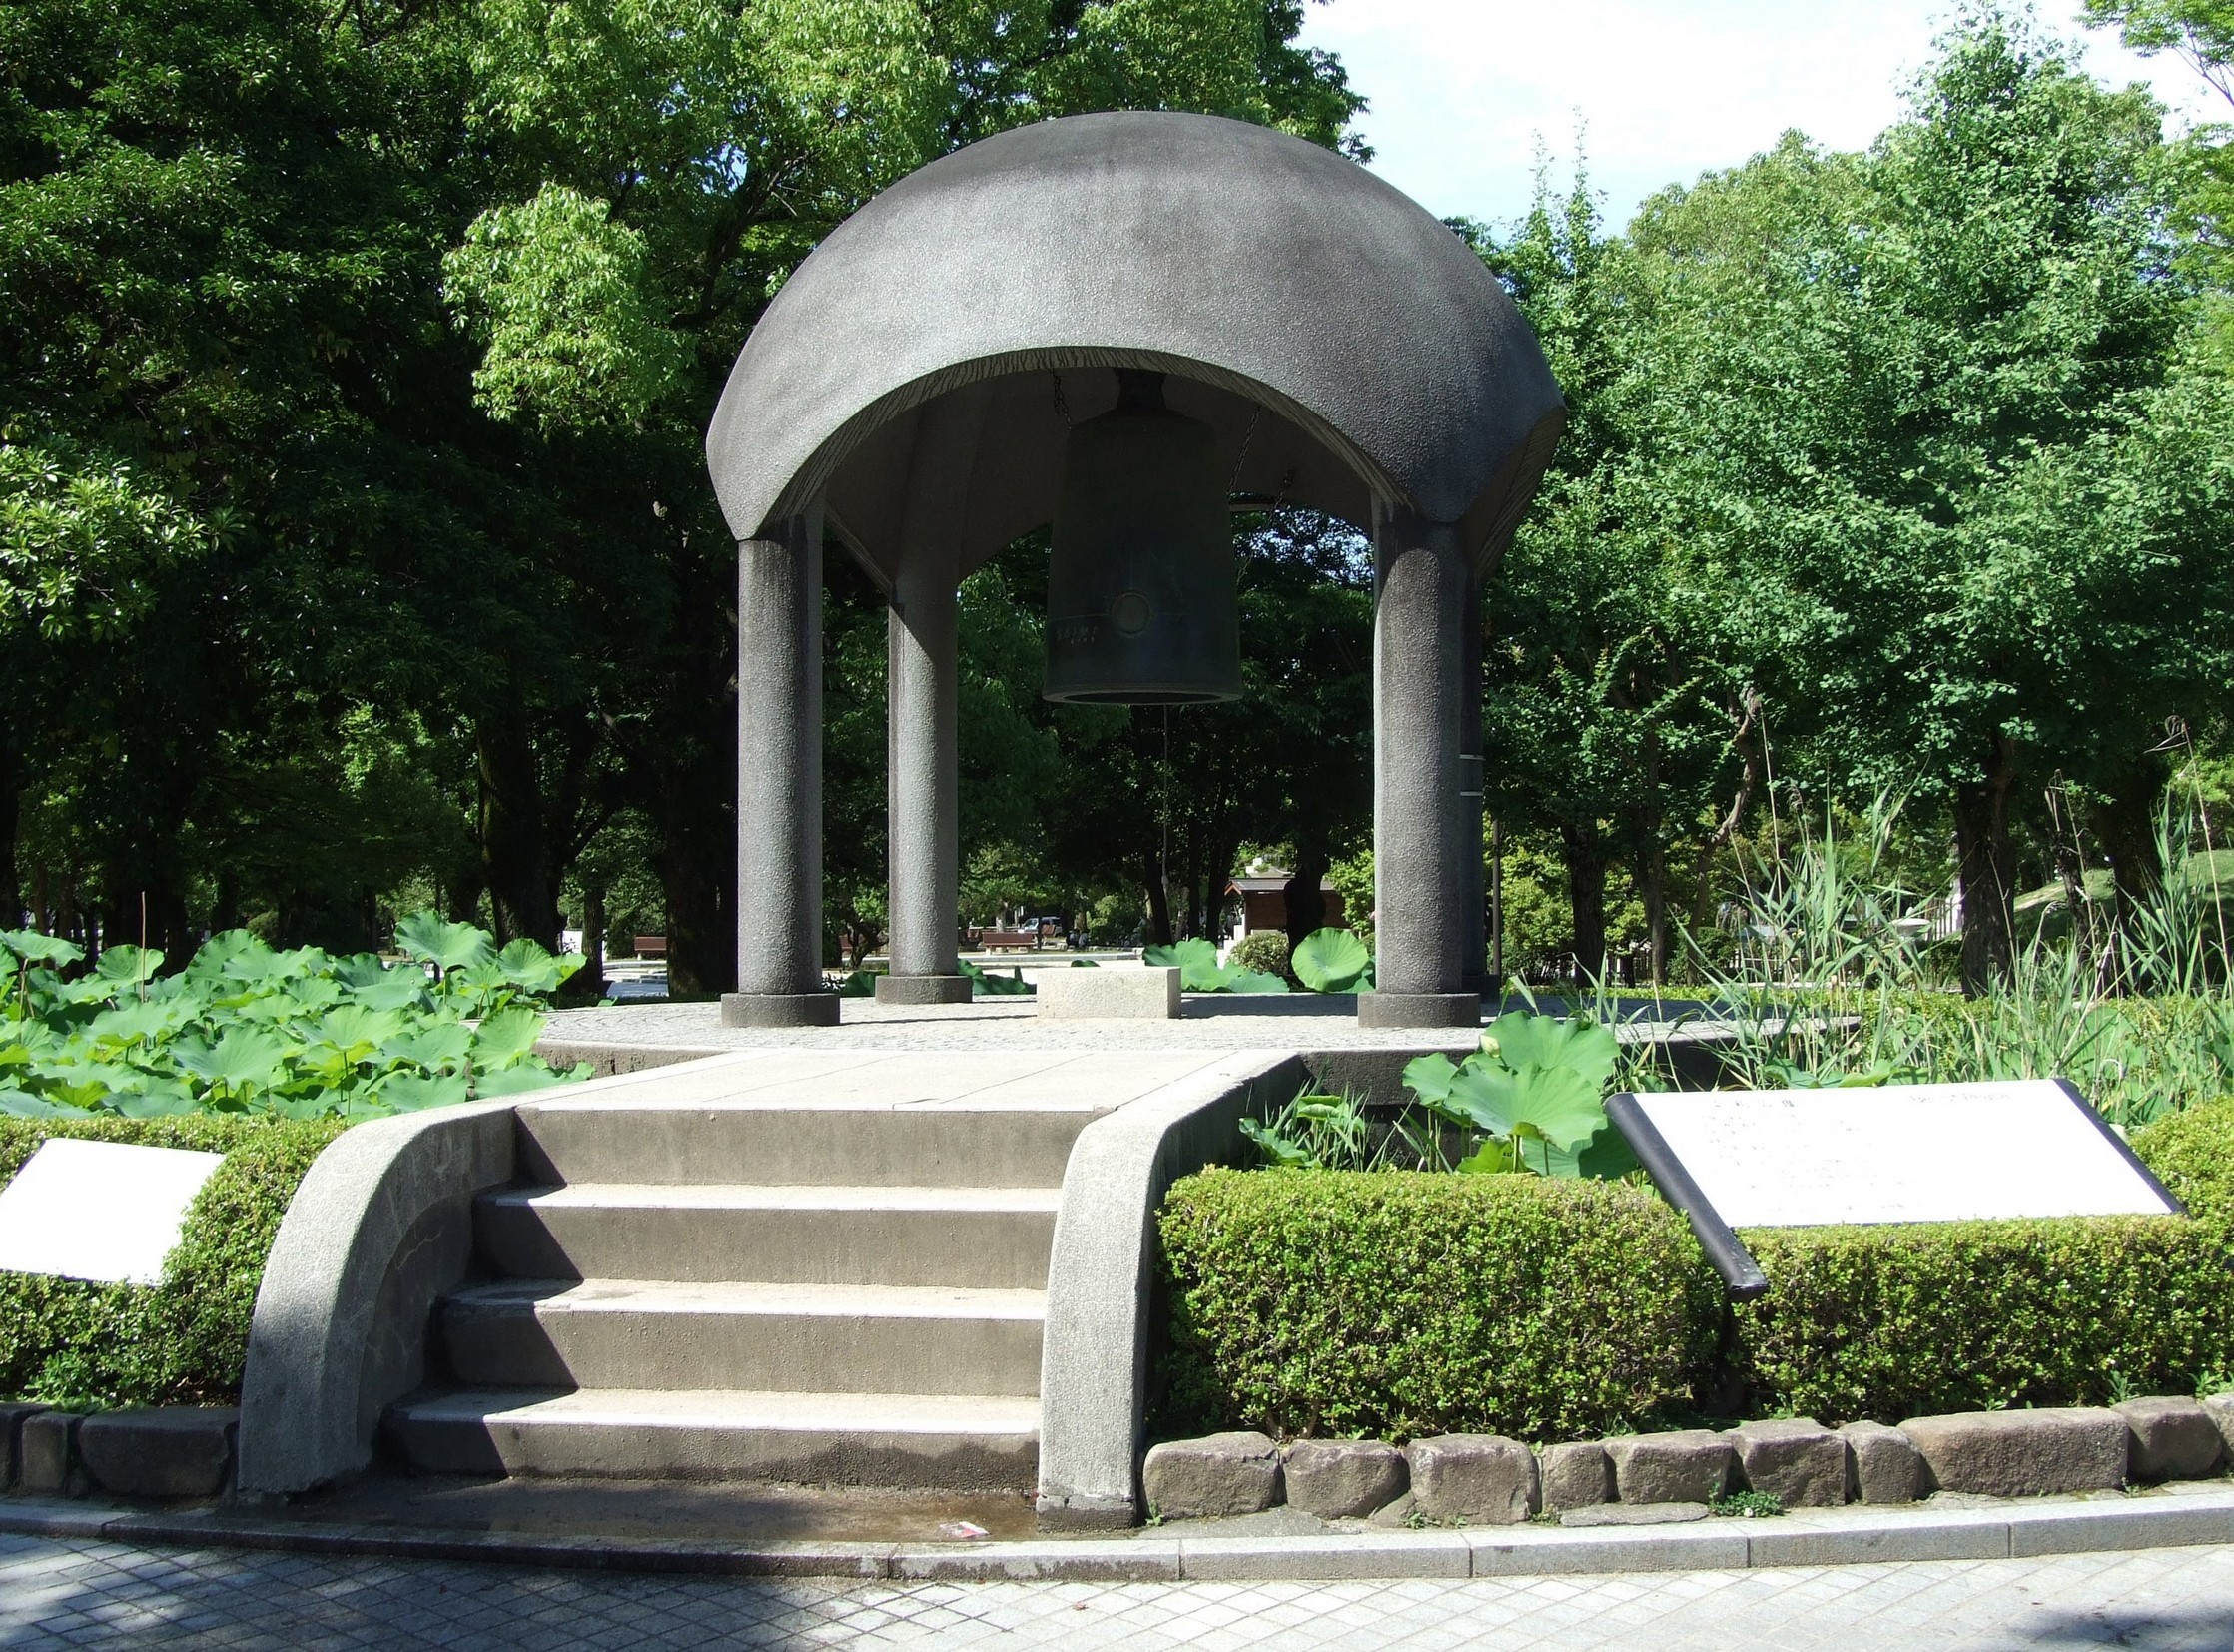 Peace Memorial Park, built with a wish for world peace